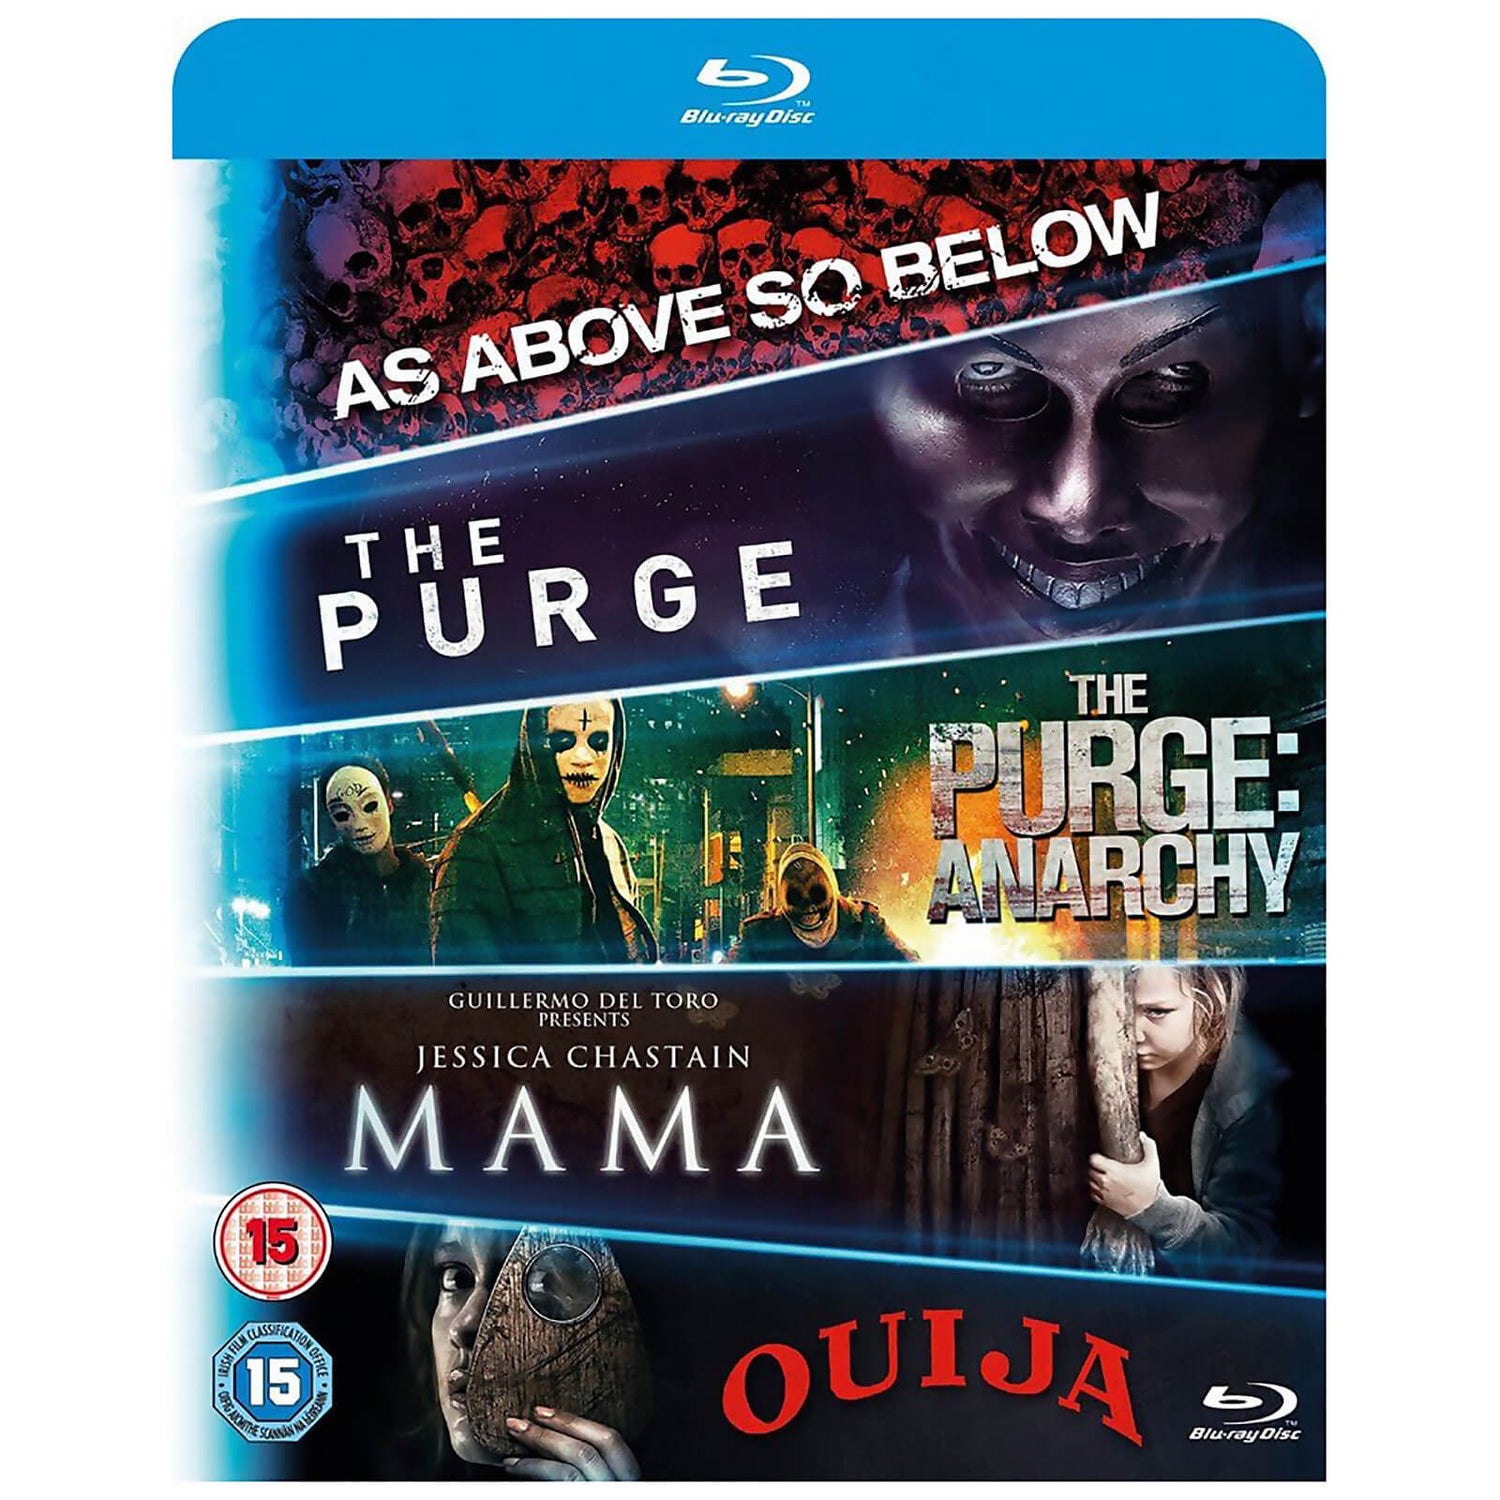 Blu-ray Starter Pack - Includues Mama, Purge 1, Purge: Anarchy, OUIJA, As Above, So Below